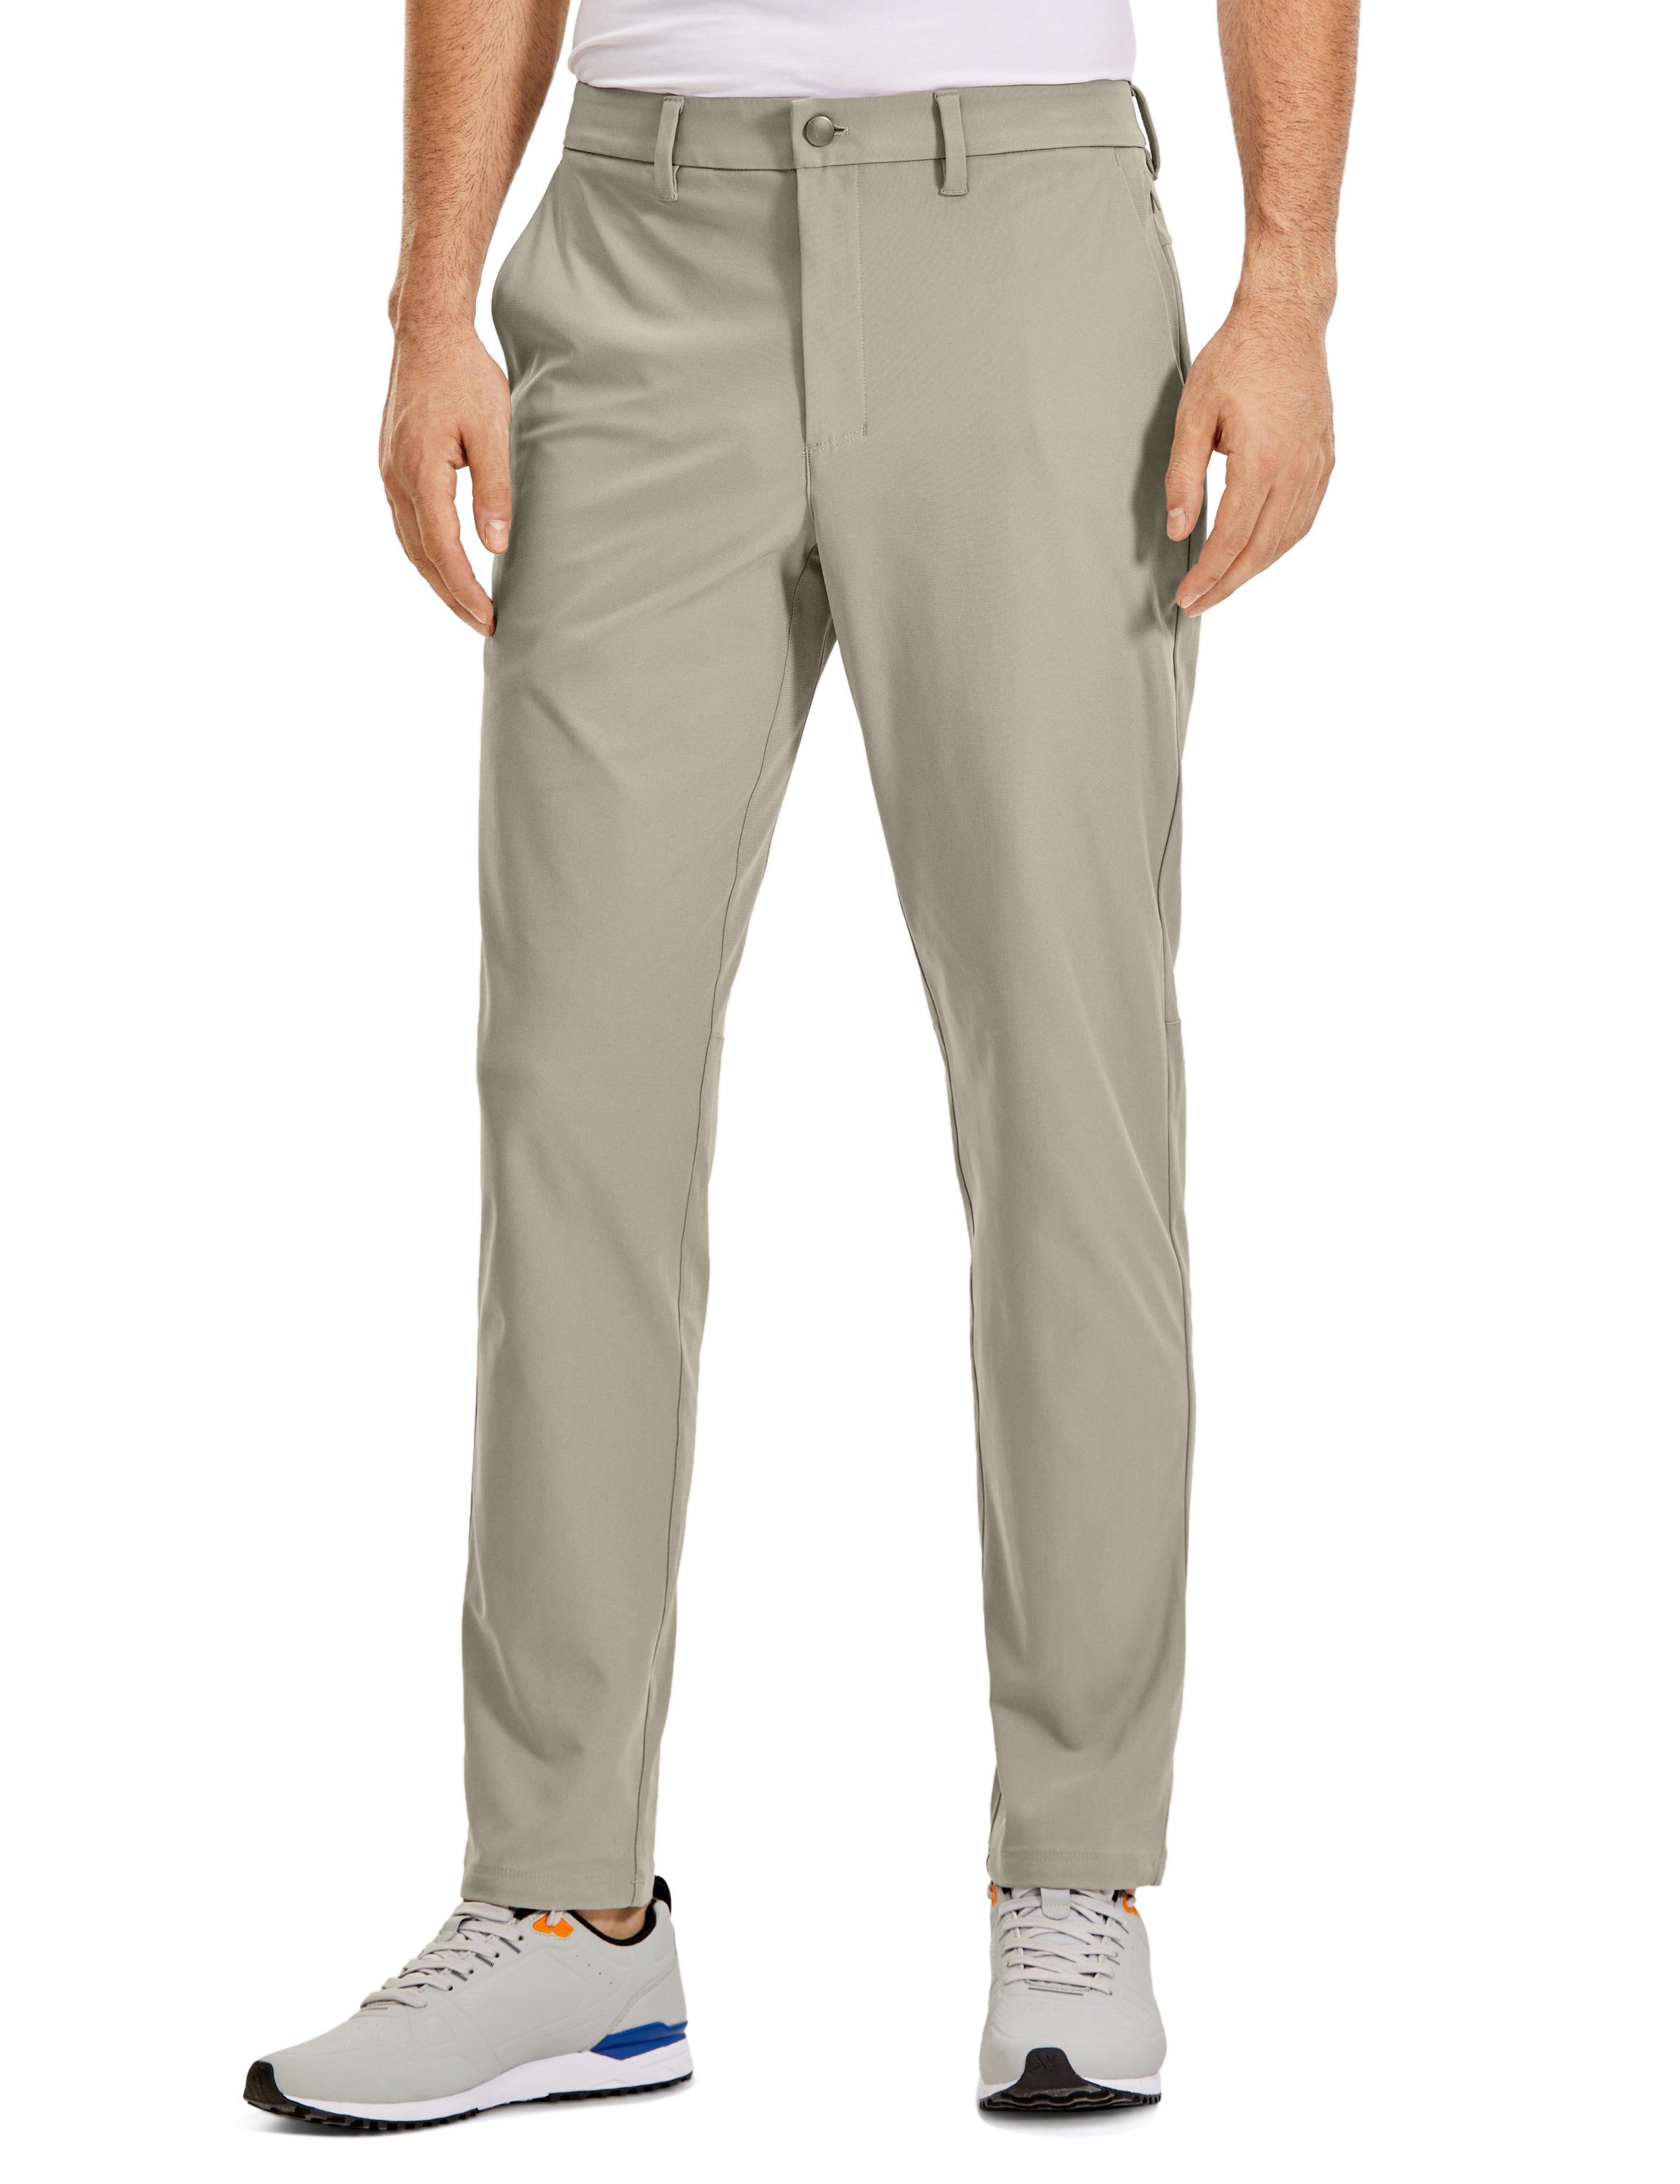 All-Day Comfy Classic-Fit Golf Pants 30''